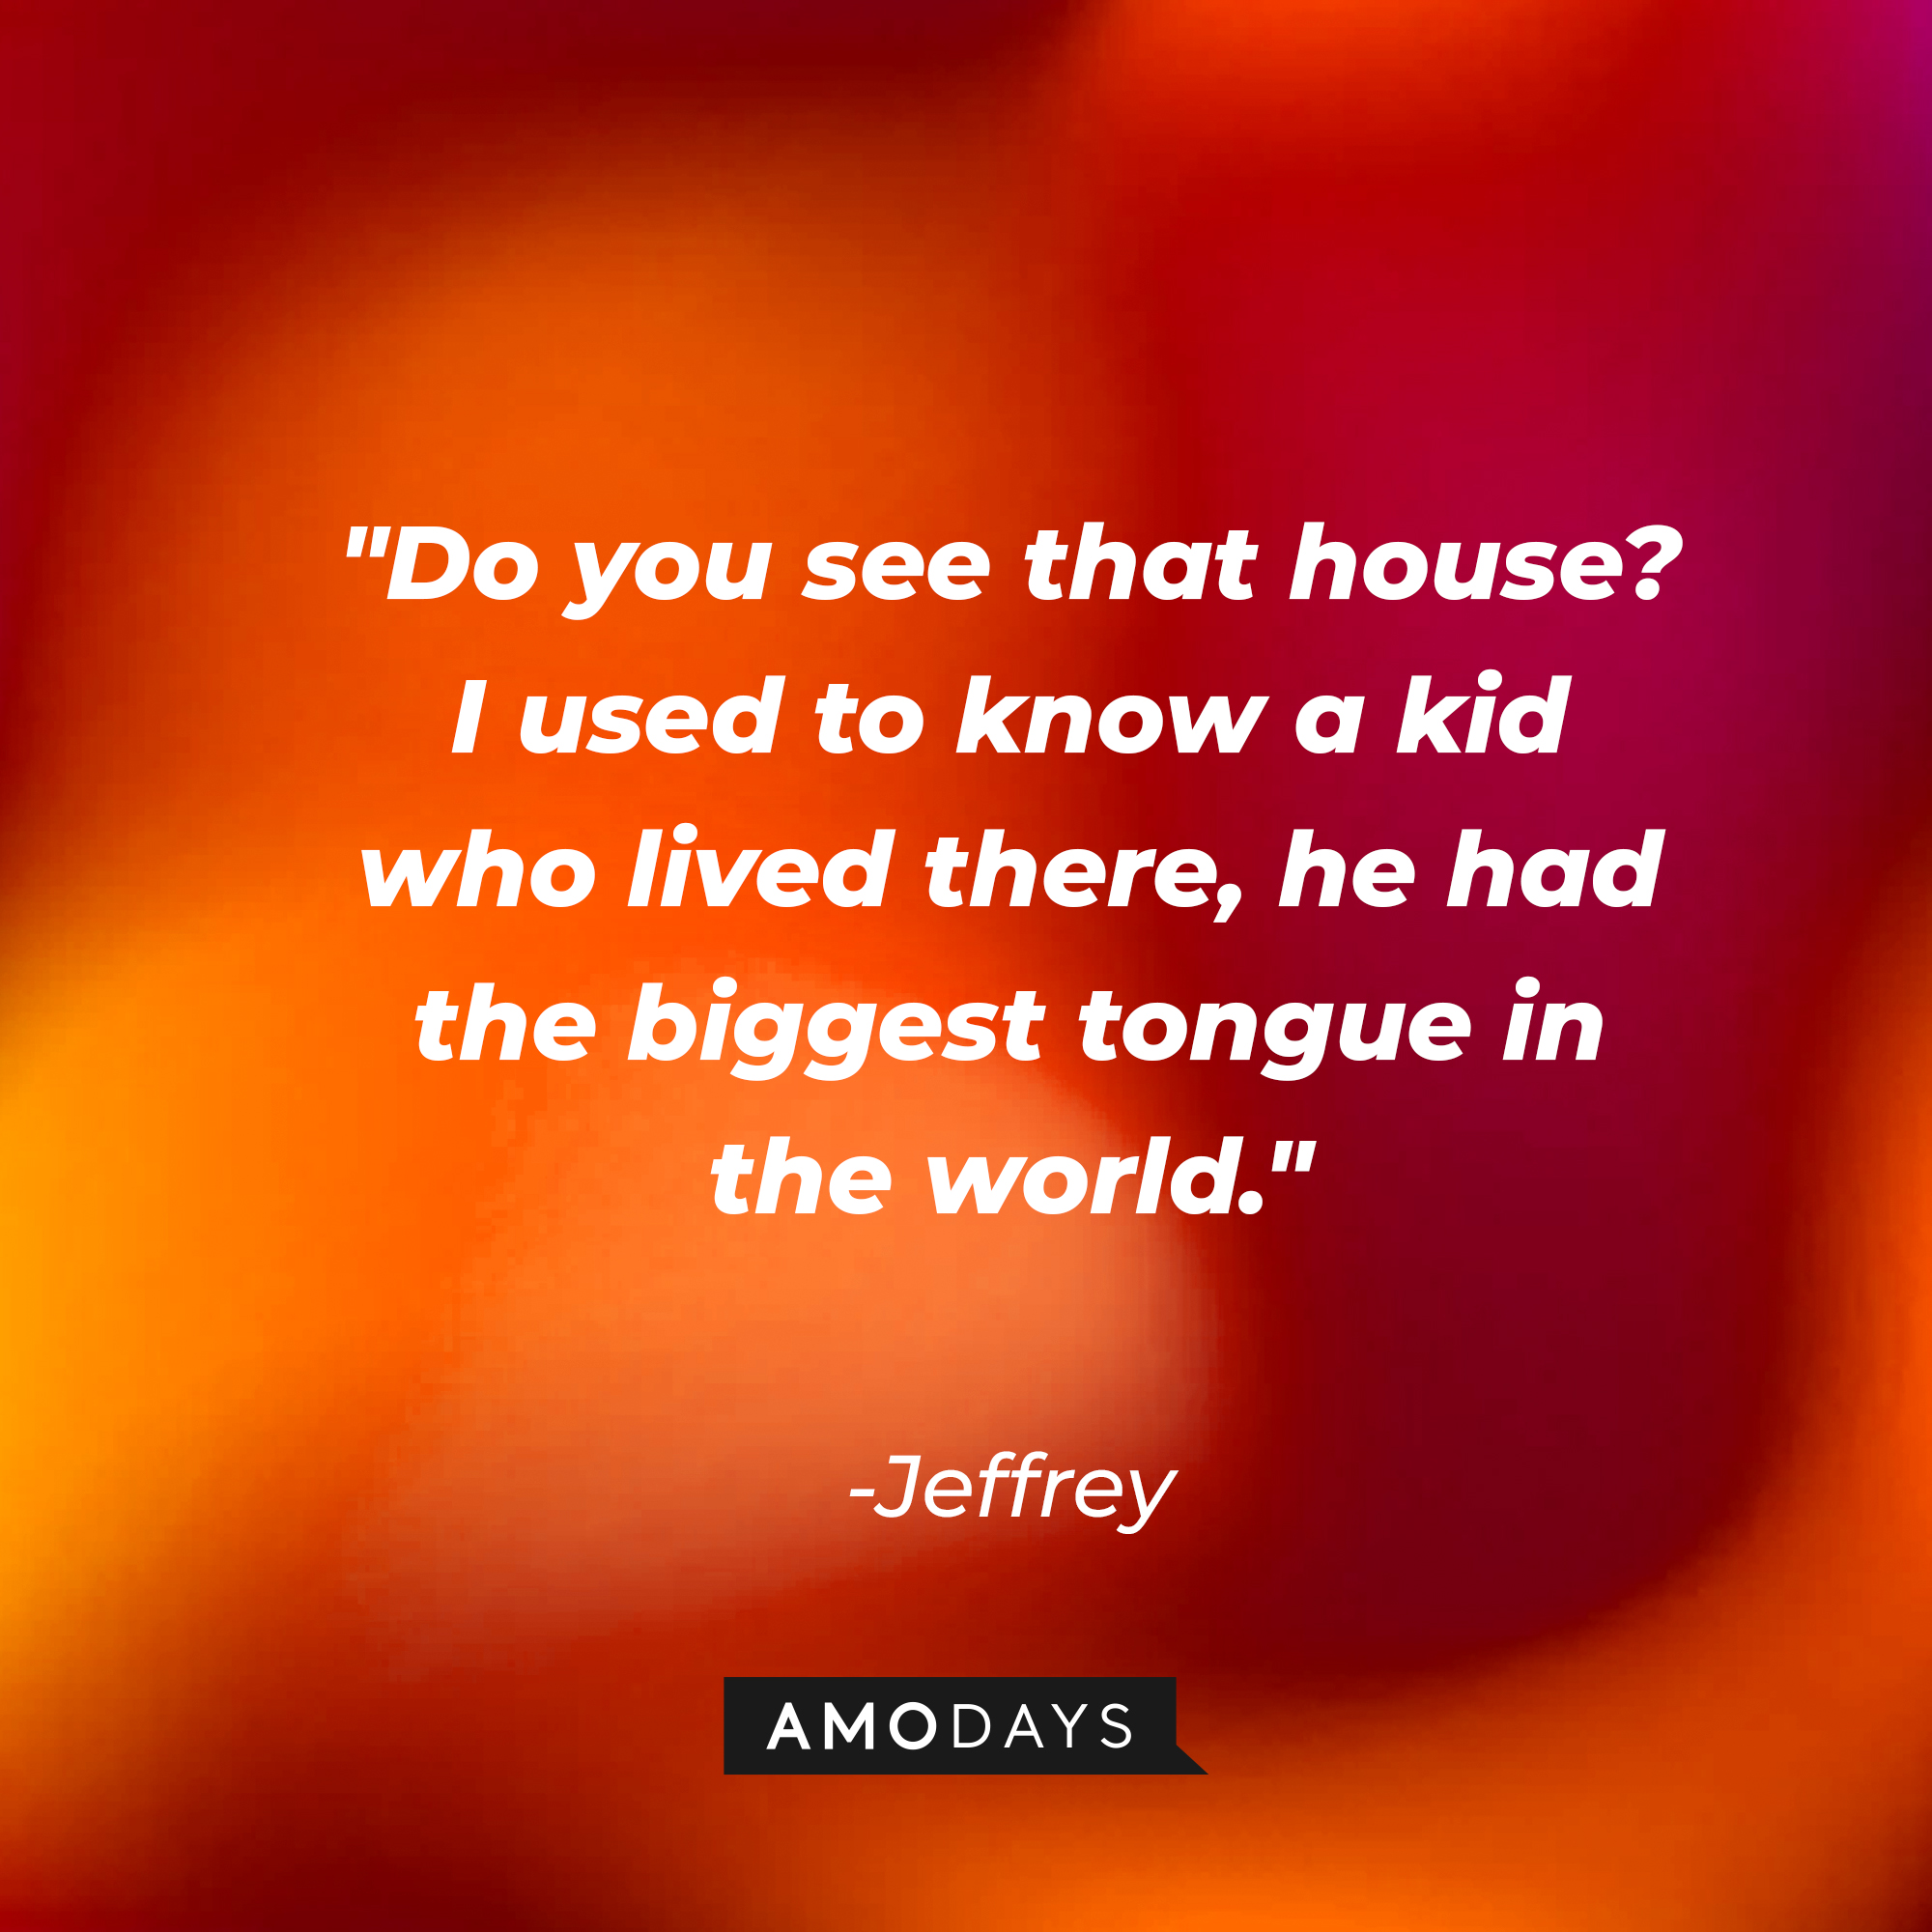 Jeffrey with his quote: "Do you see that house? I used to know a kid who lived there, he had the biggest tongue in the world."  | Source: facebook.com/BlueVelvetMovie